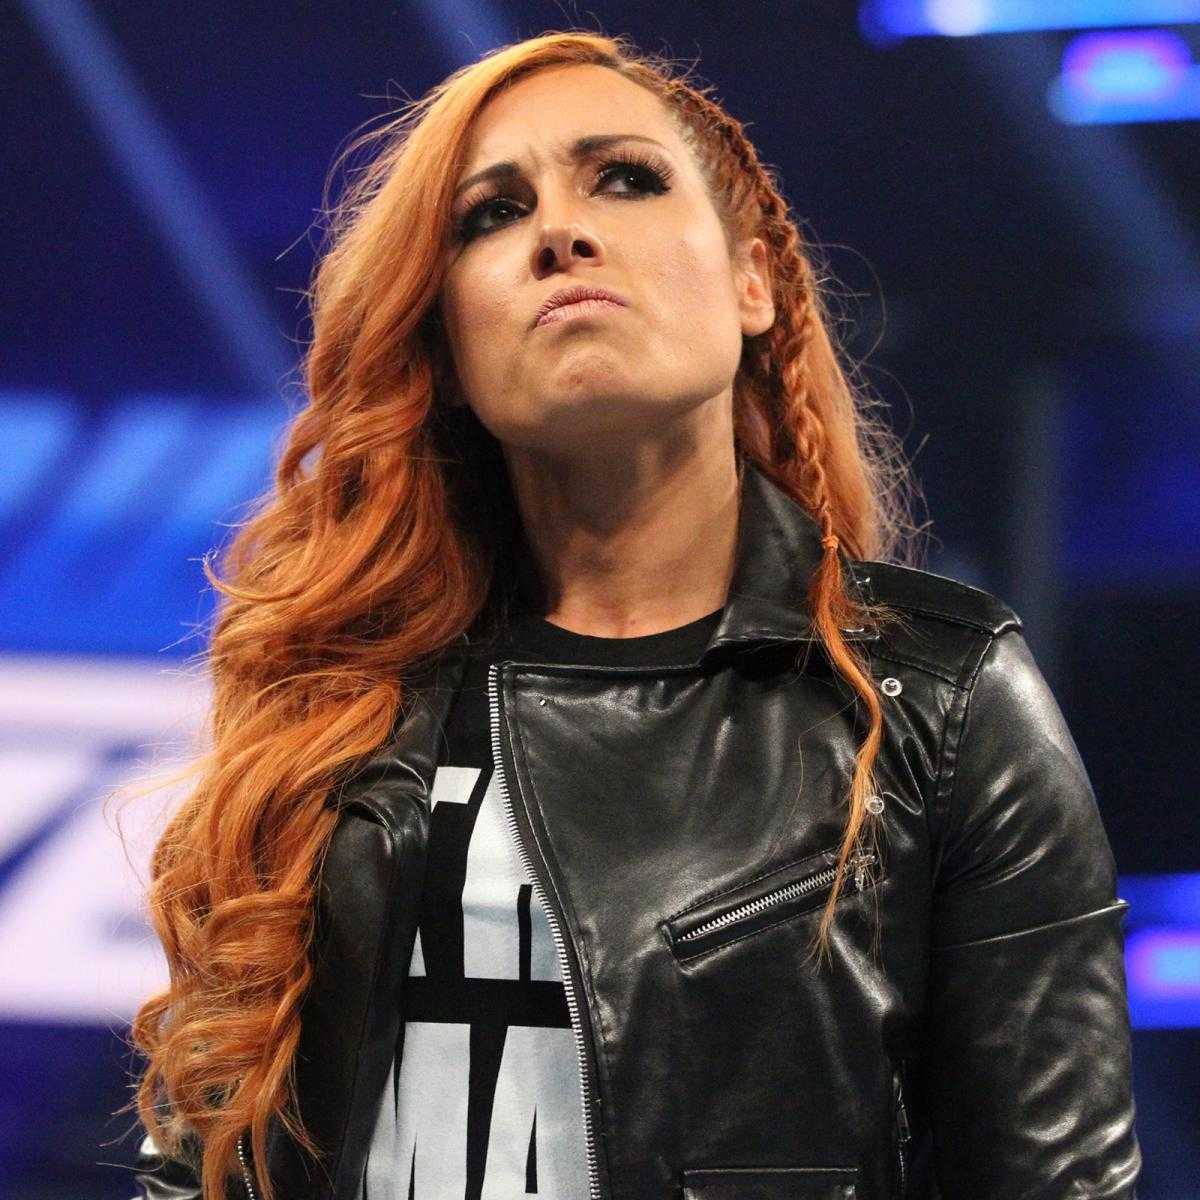 70+ Hot And Sexy Pictures of Becky Lynch – WWE Diva Will Sizzle You Up 29